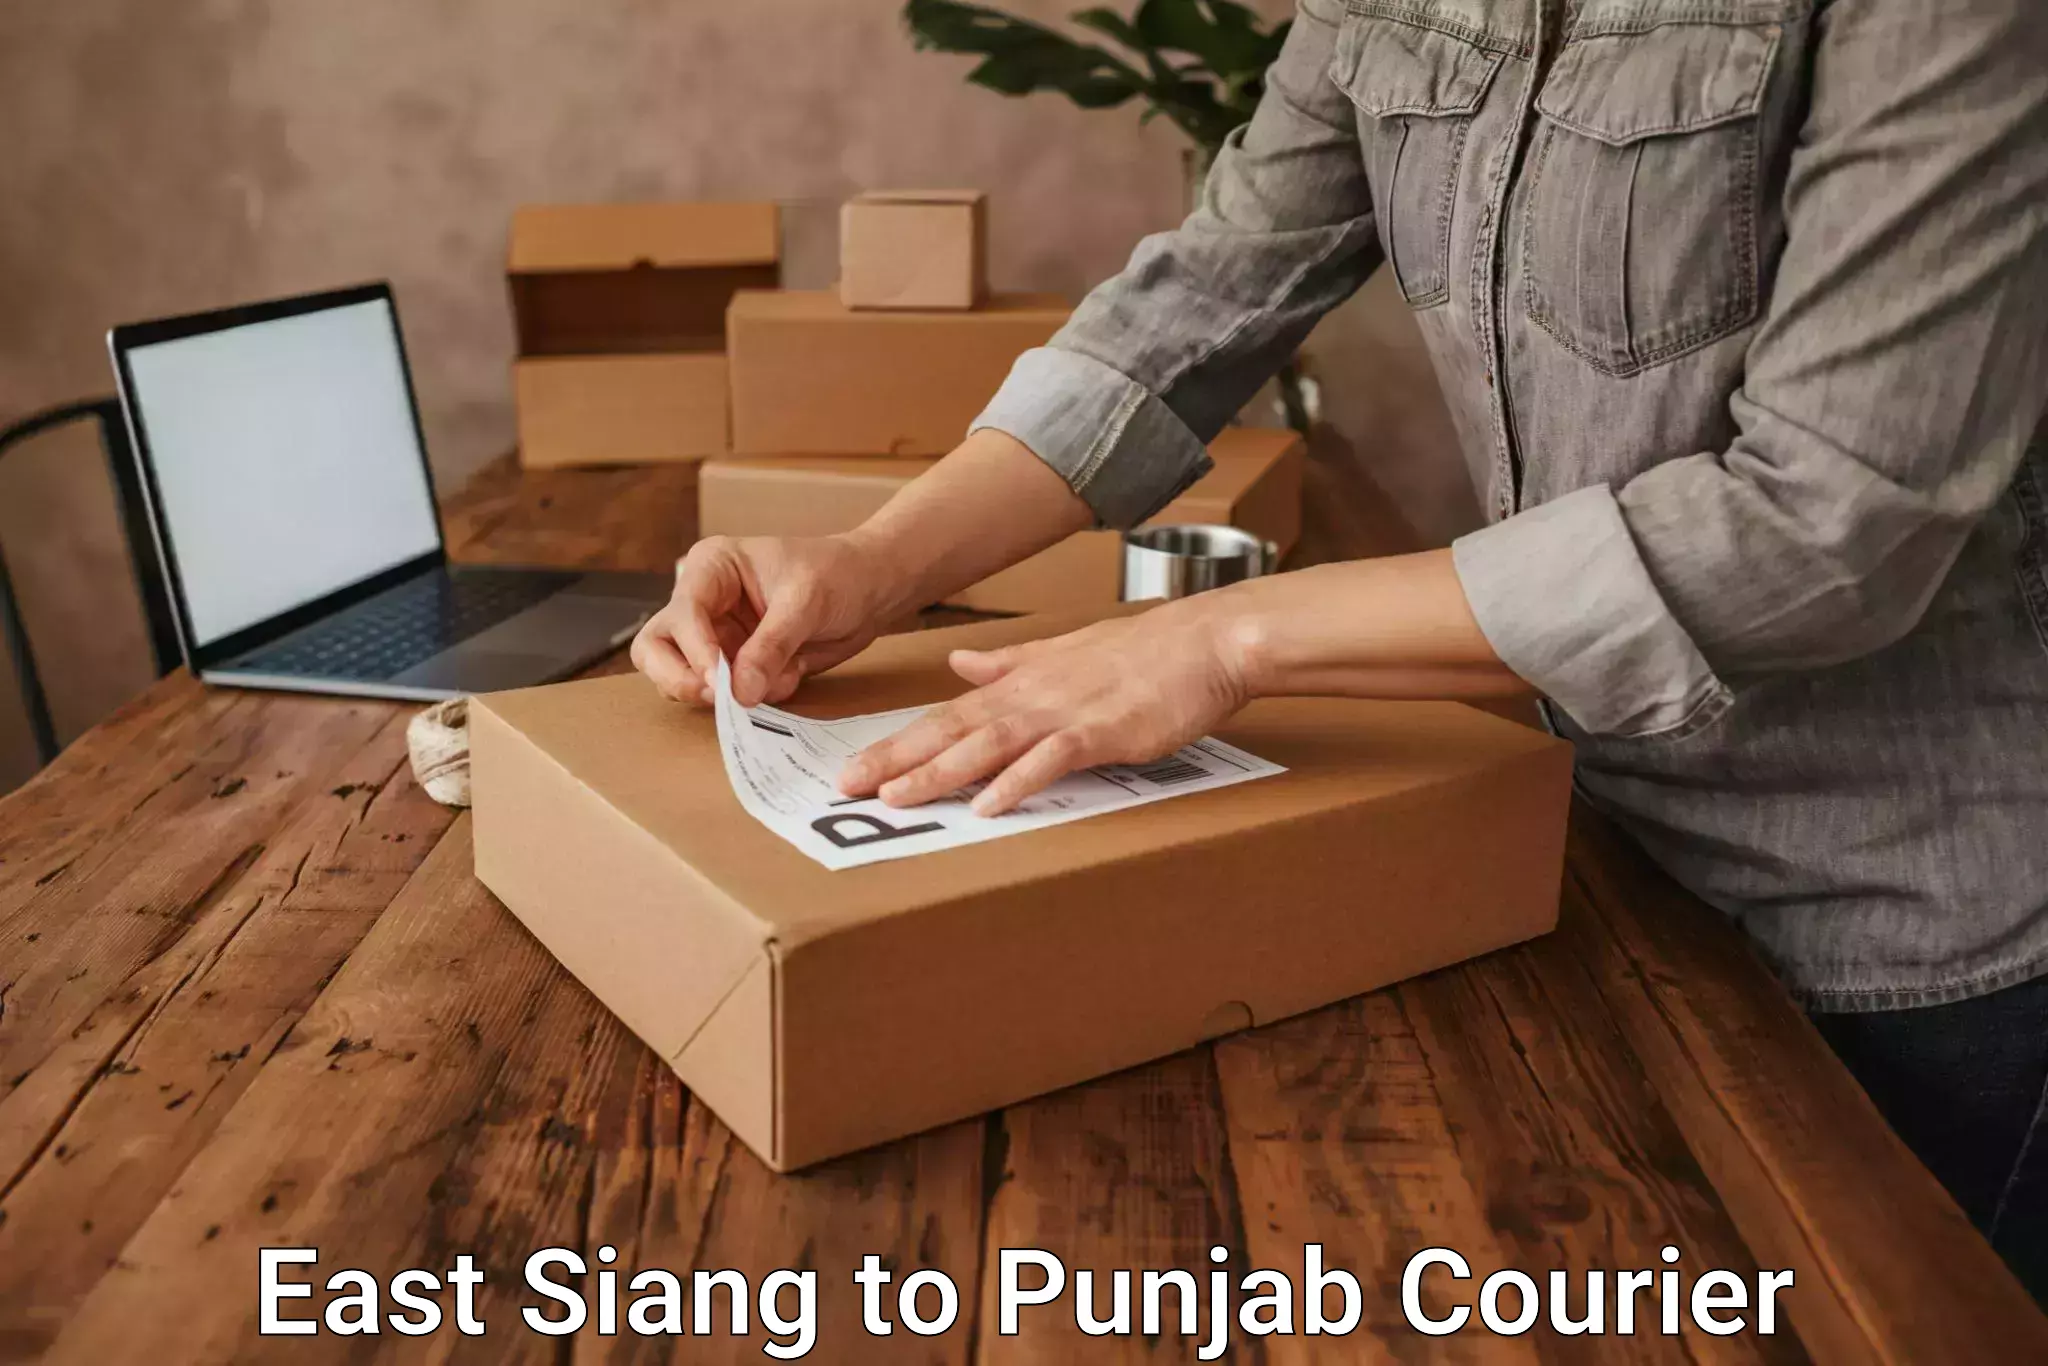 Courier app in East Siang to Amritsar